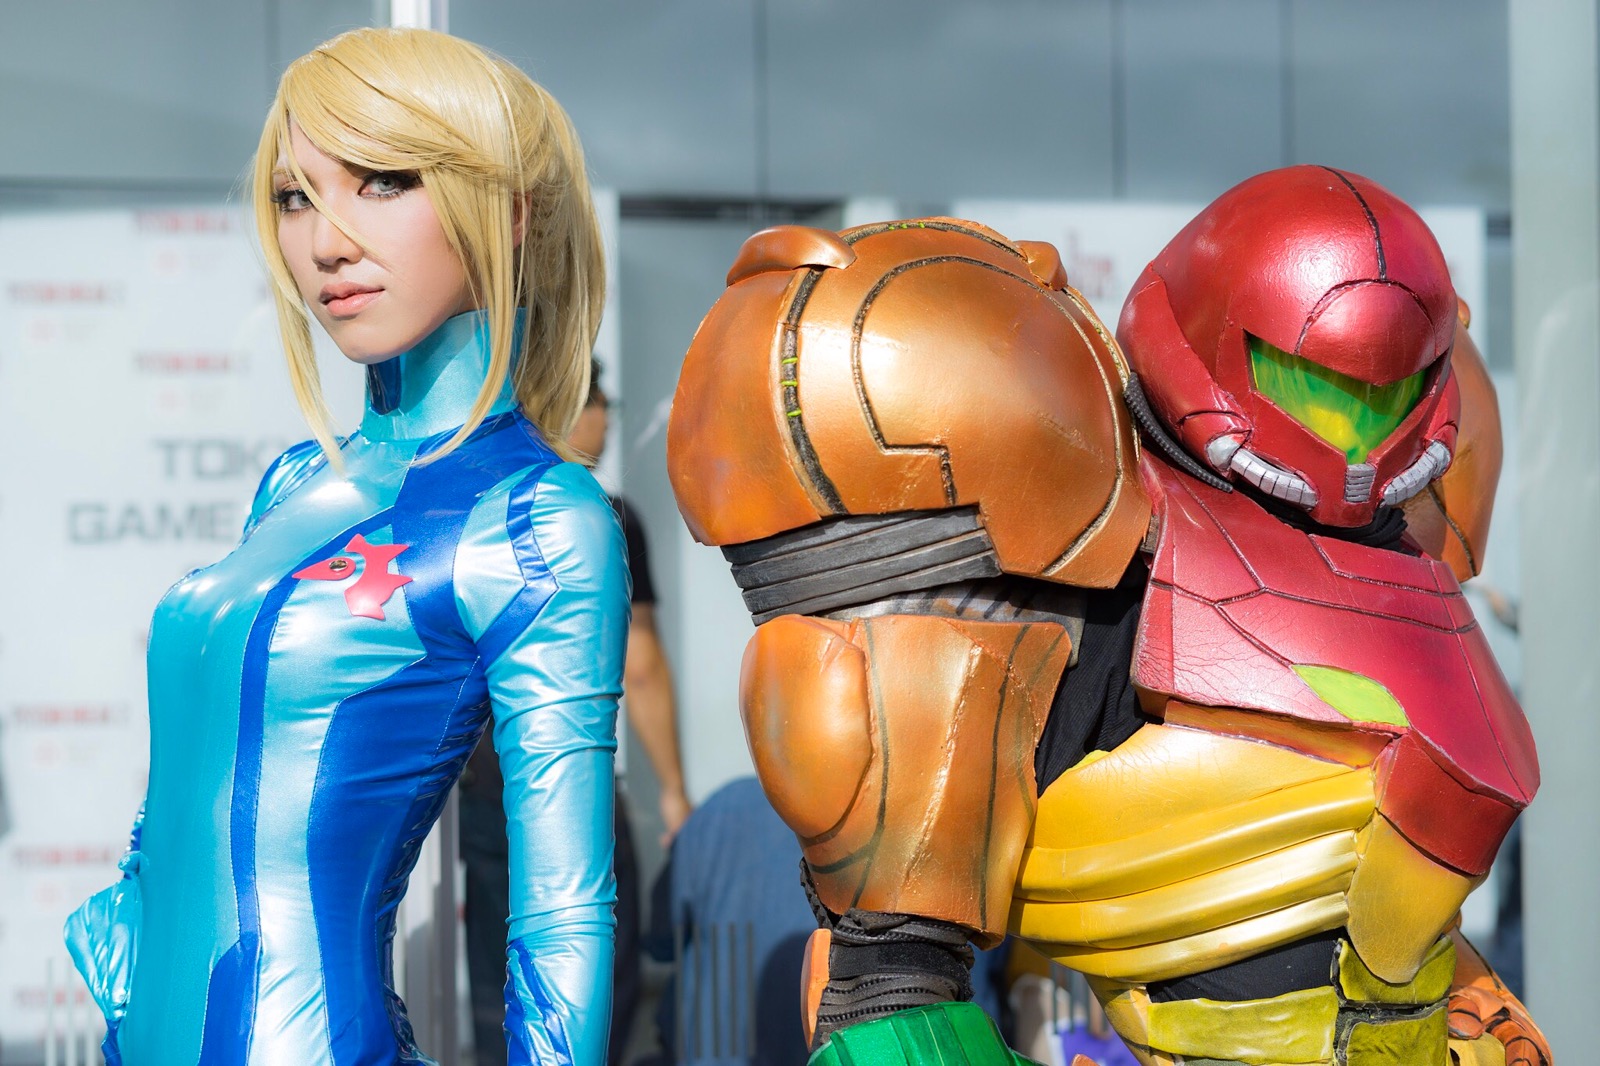 The Fusion of Fantasy and Reality: Tokyo Game Show 2017 Cosplay Collection